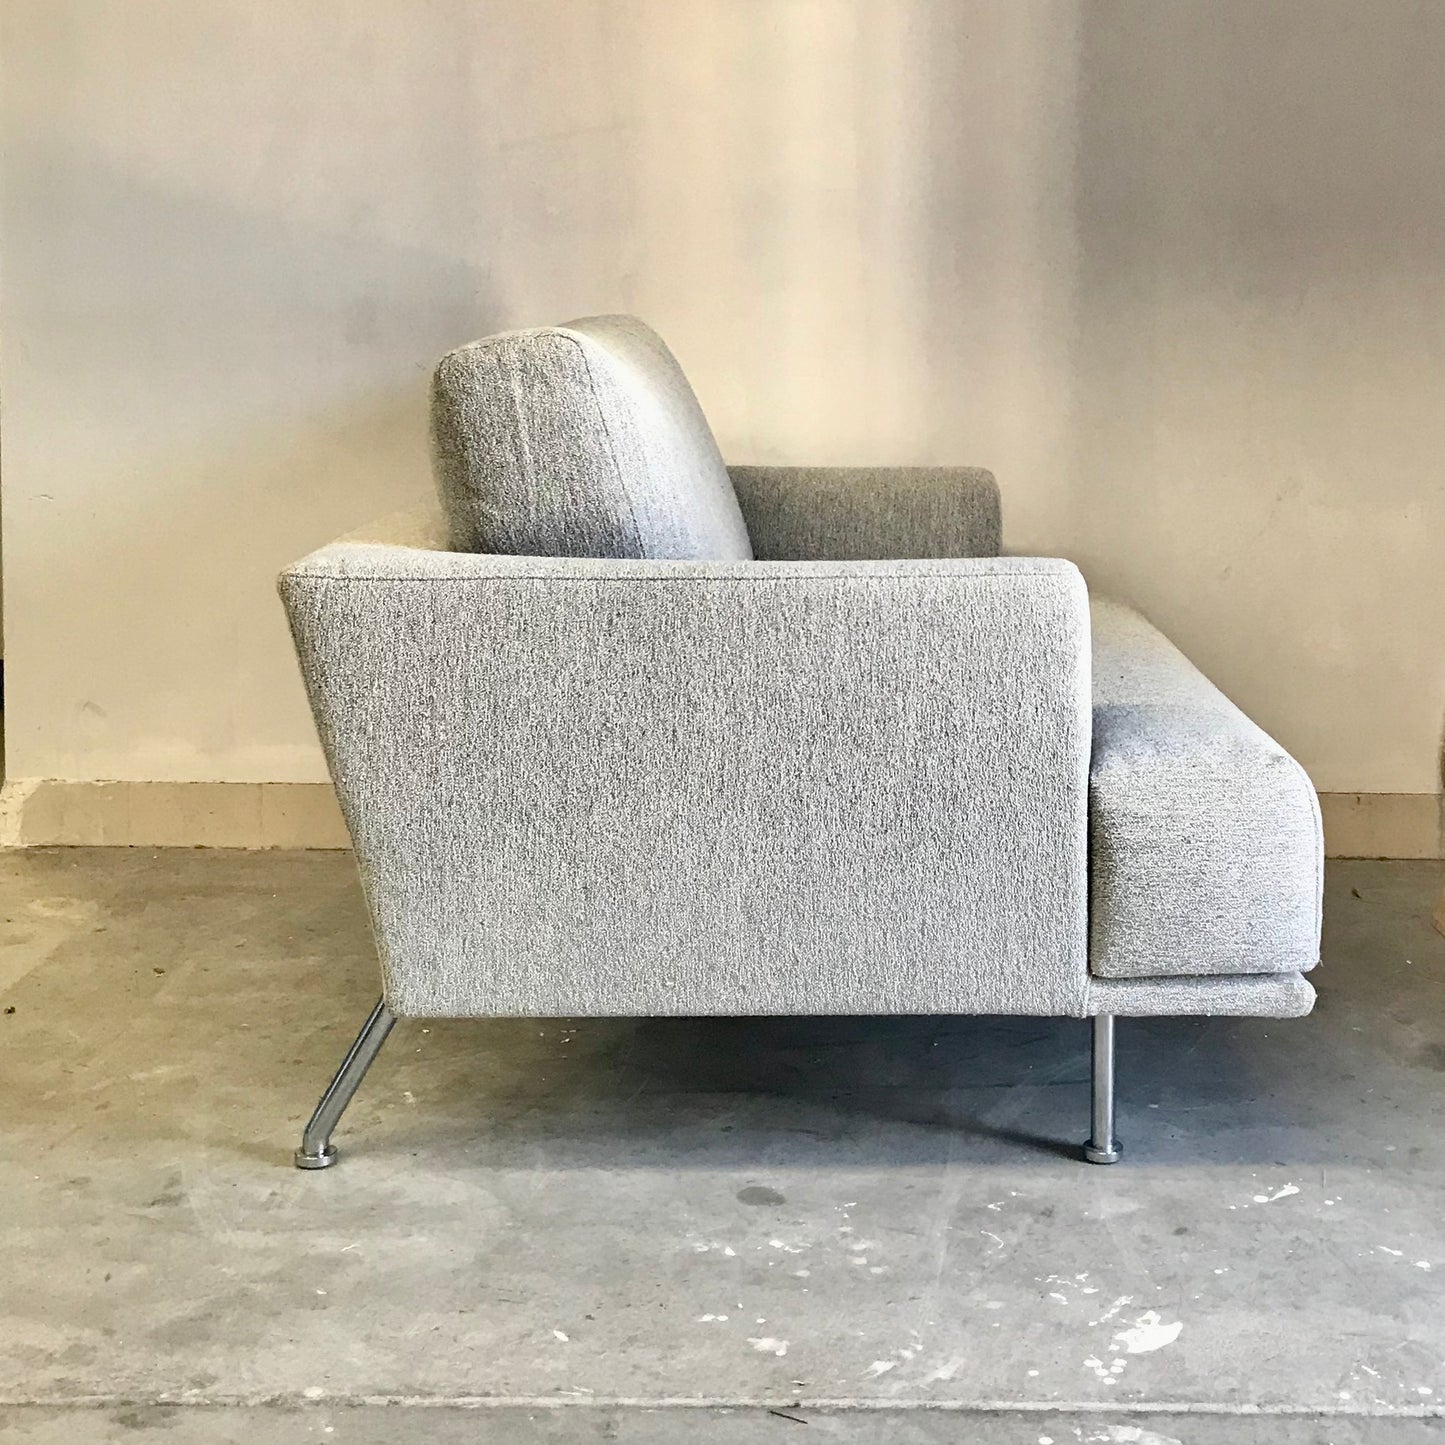 Load image into Gallery viewer, Nest Armchair by Piero Lissoni for Cassina (2 available)
